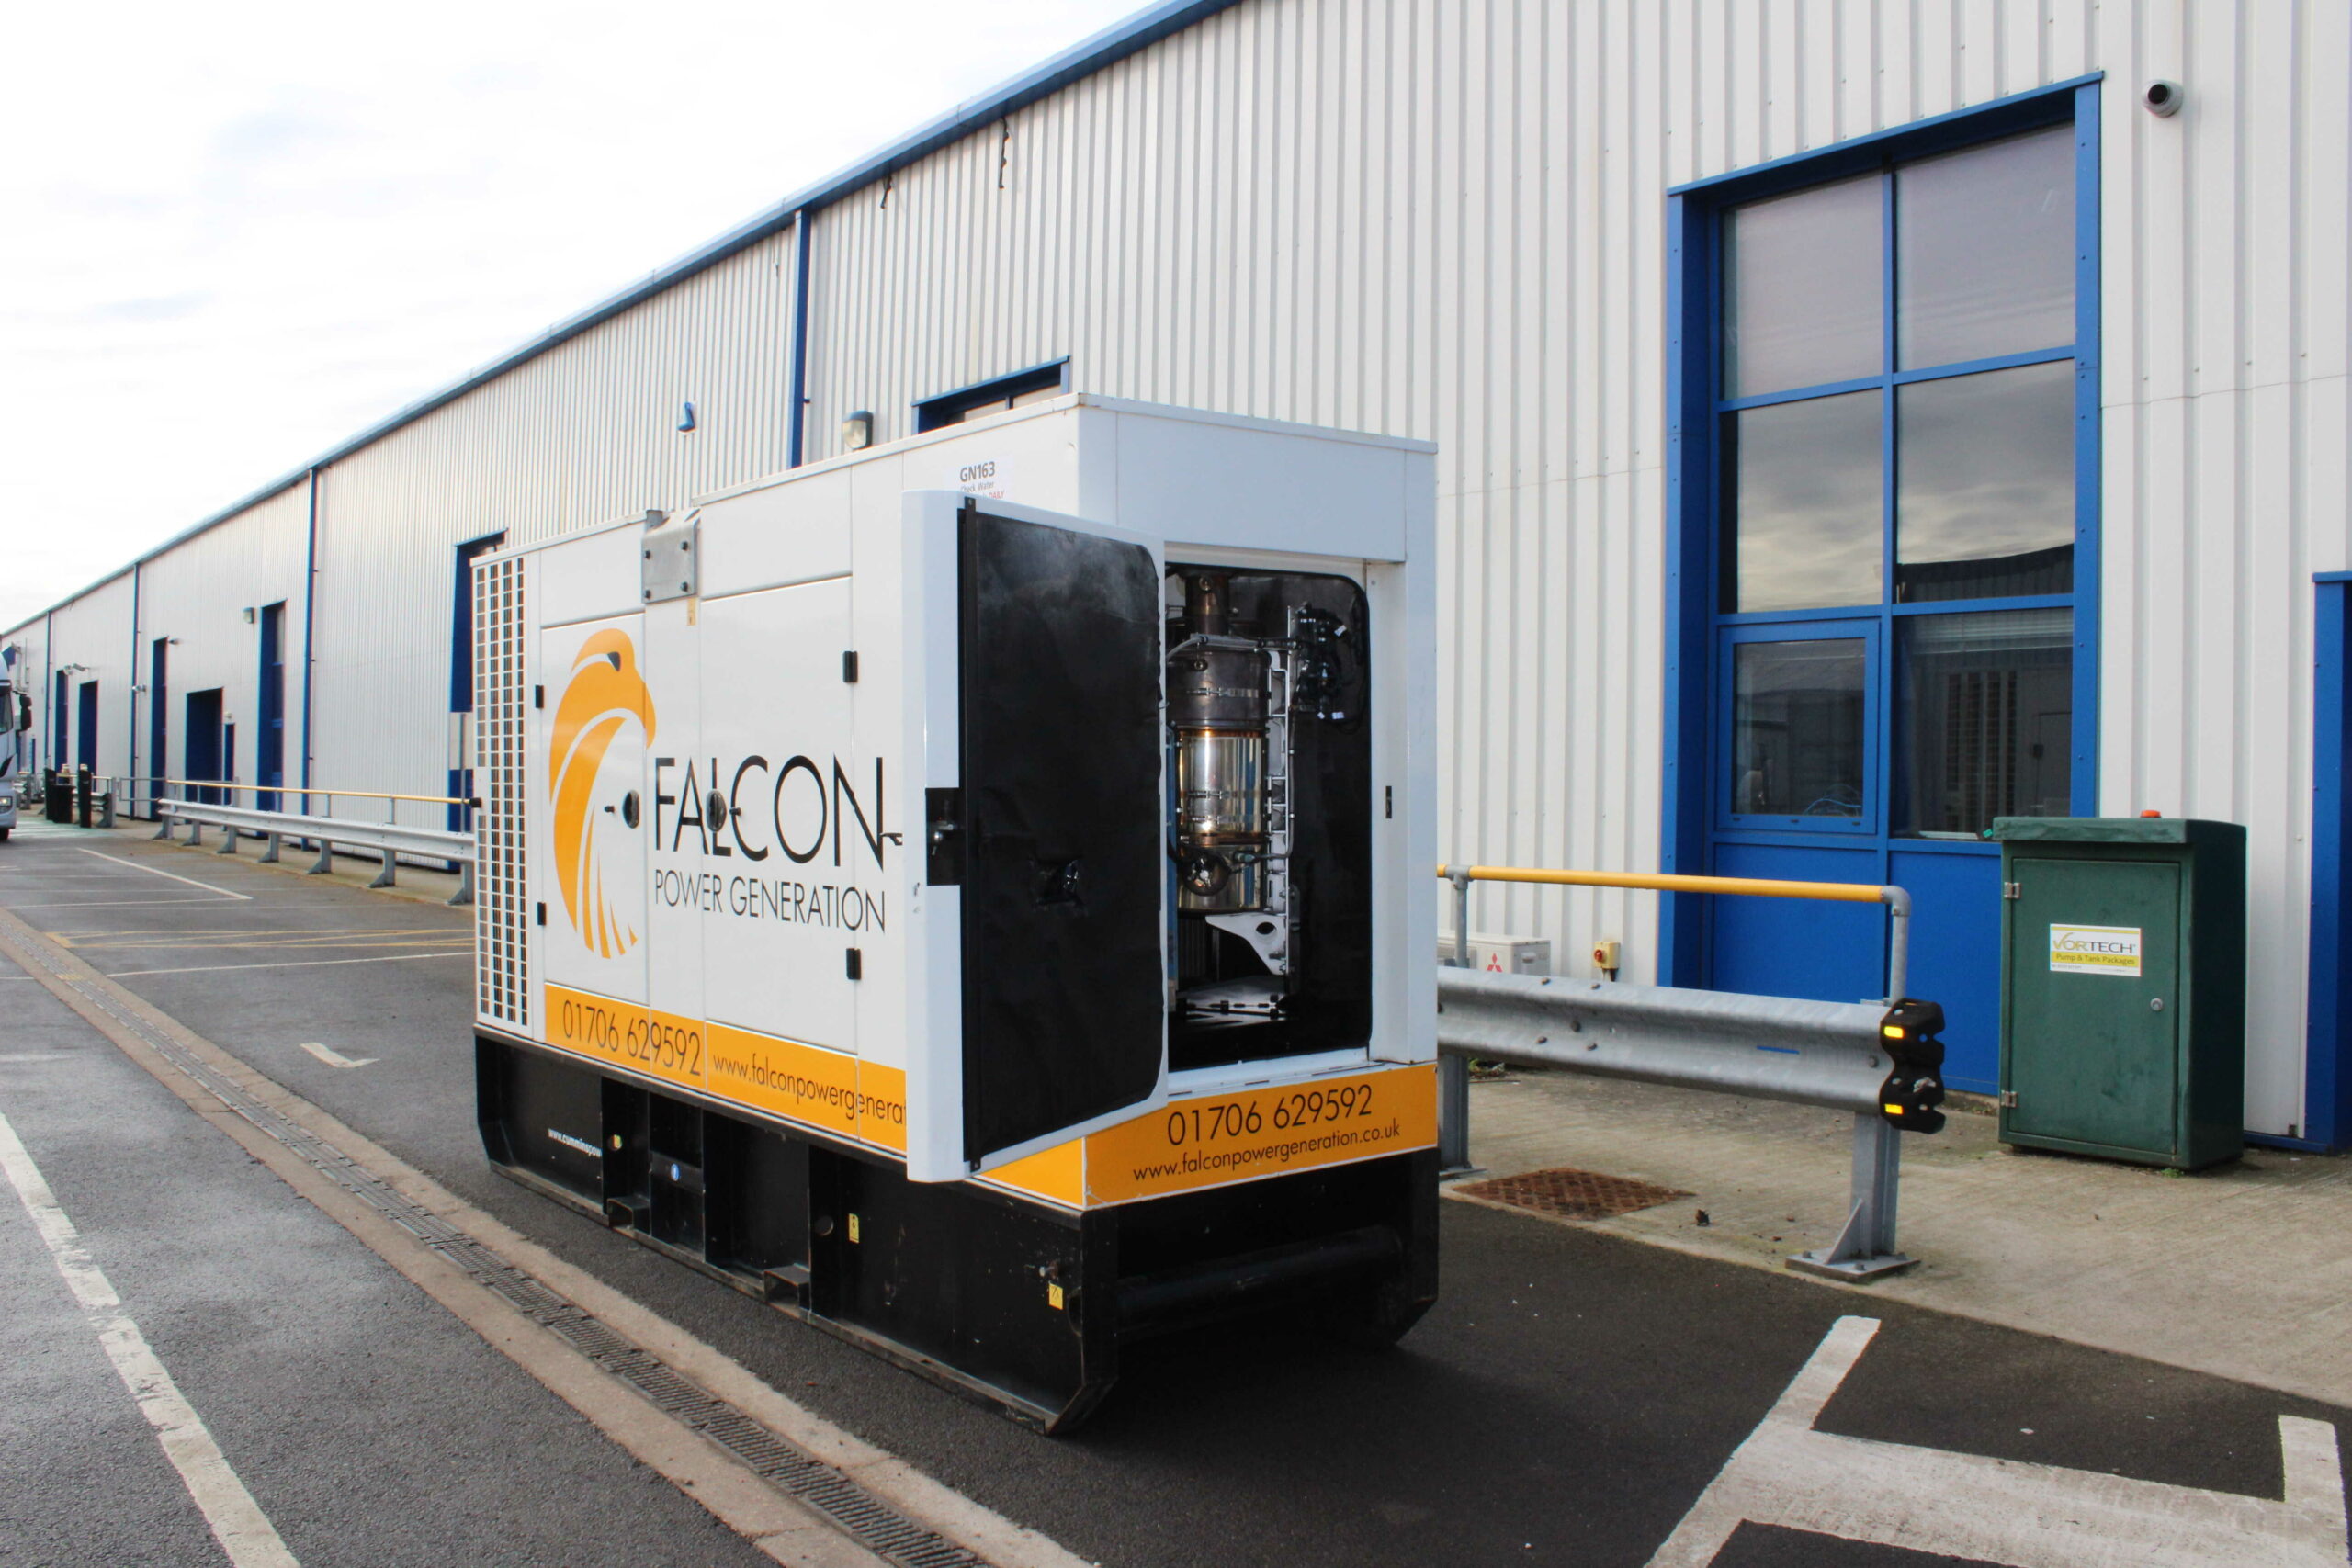 Falcon genset fitted with Eminox retrofit technology